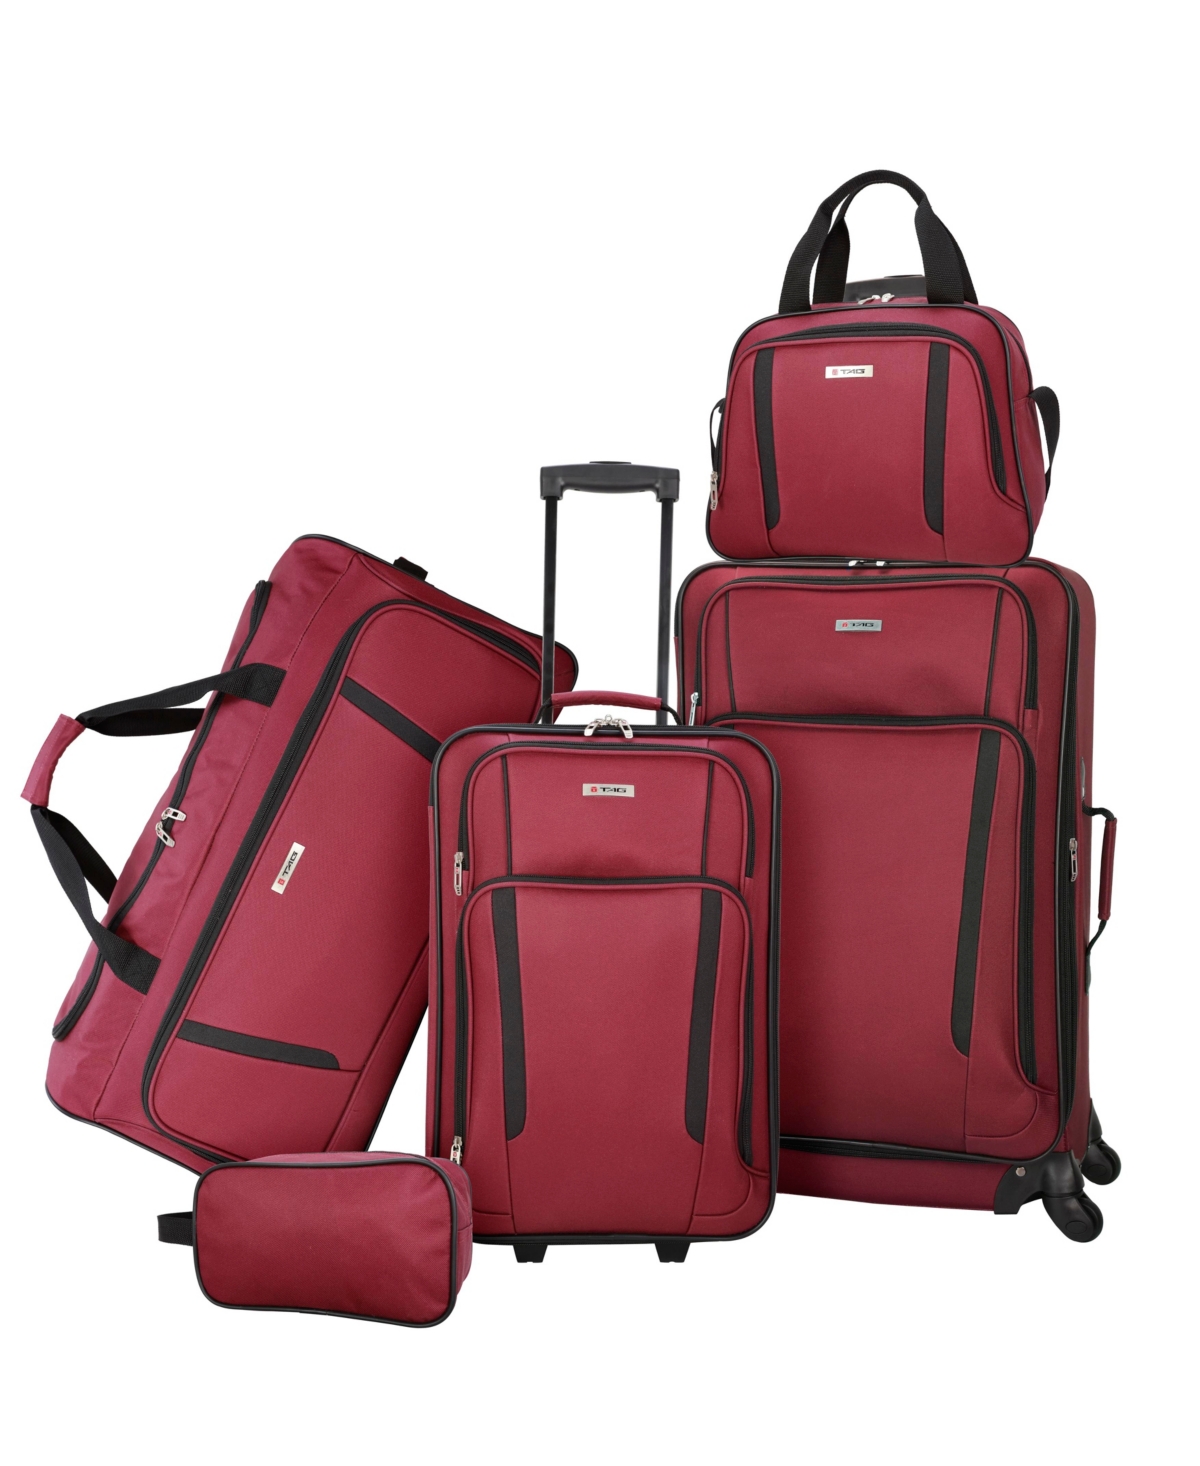 Freehold 5-Piece Softside Spinner Luggage Set - Spotted Leaf